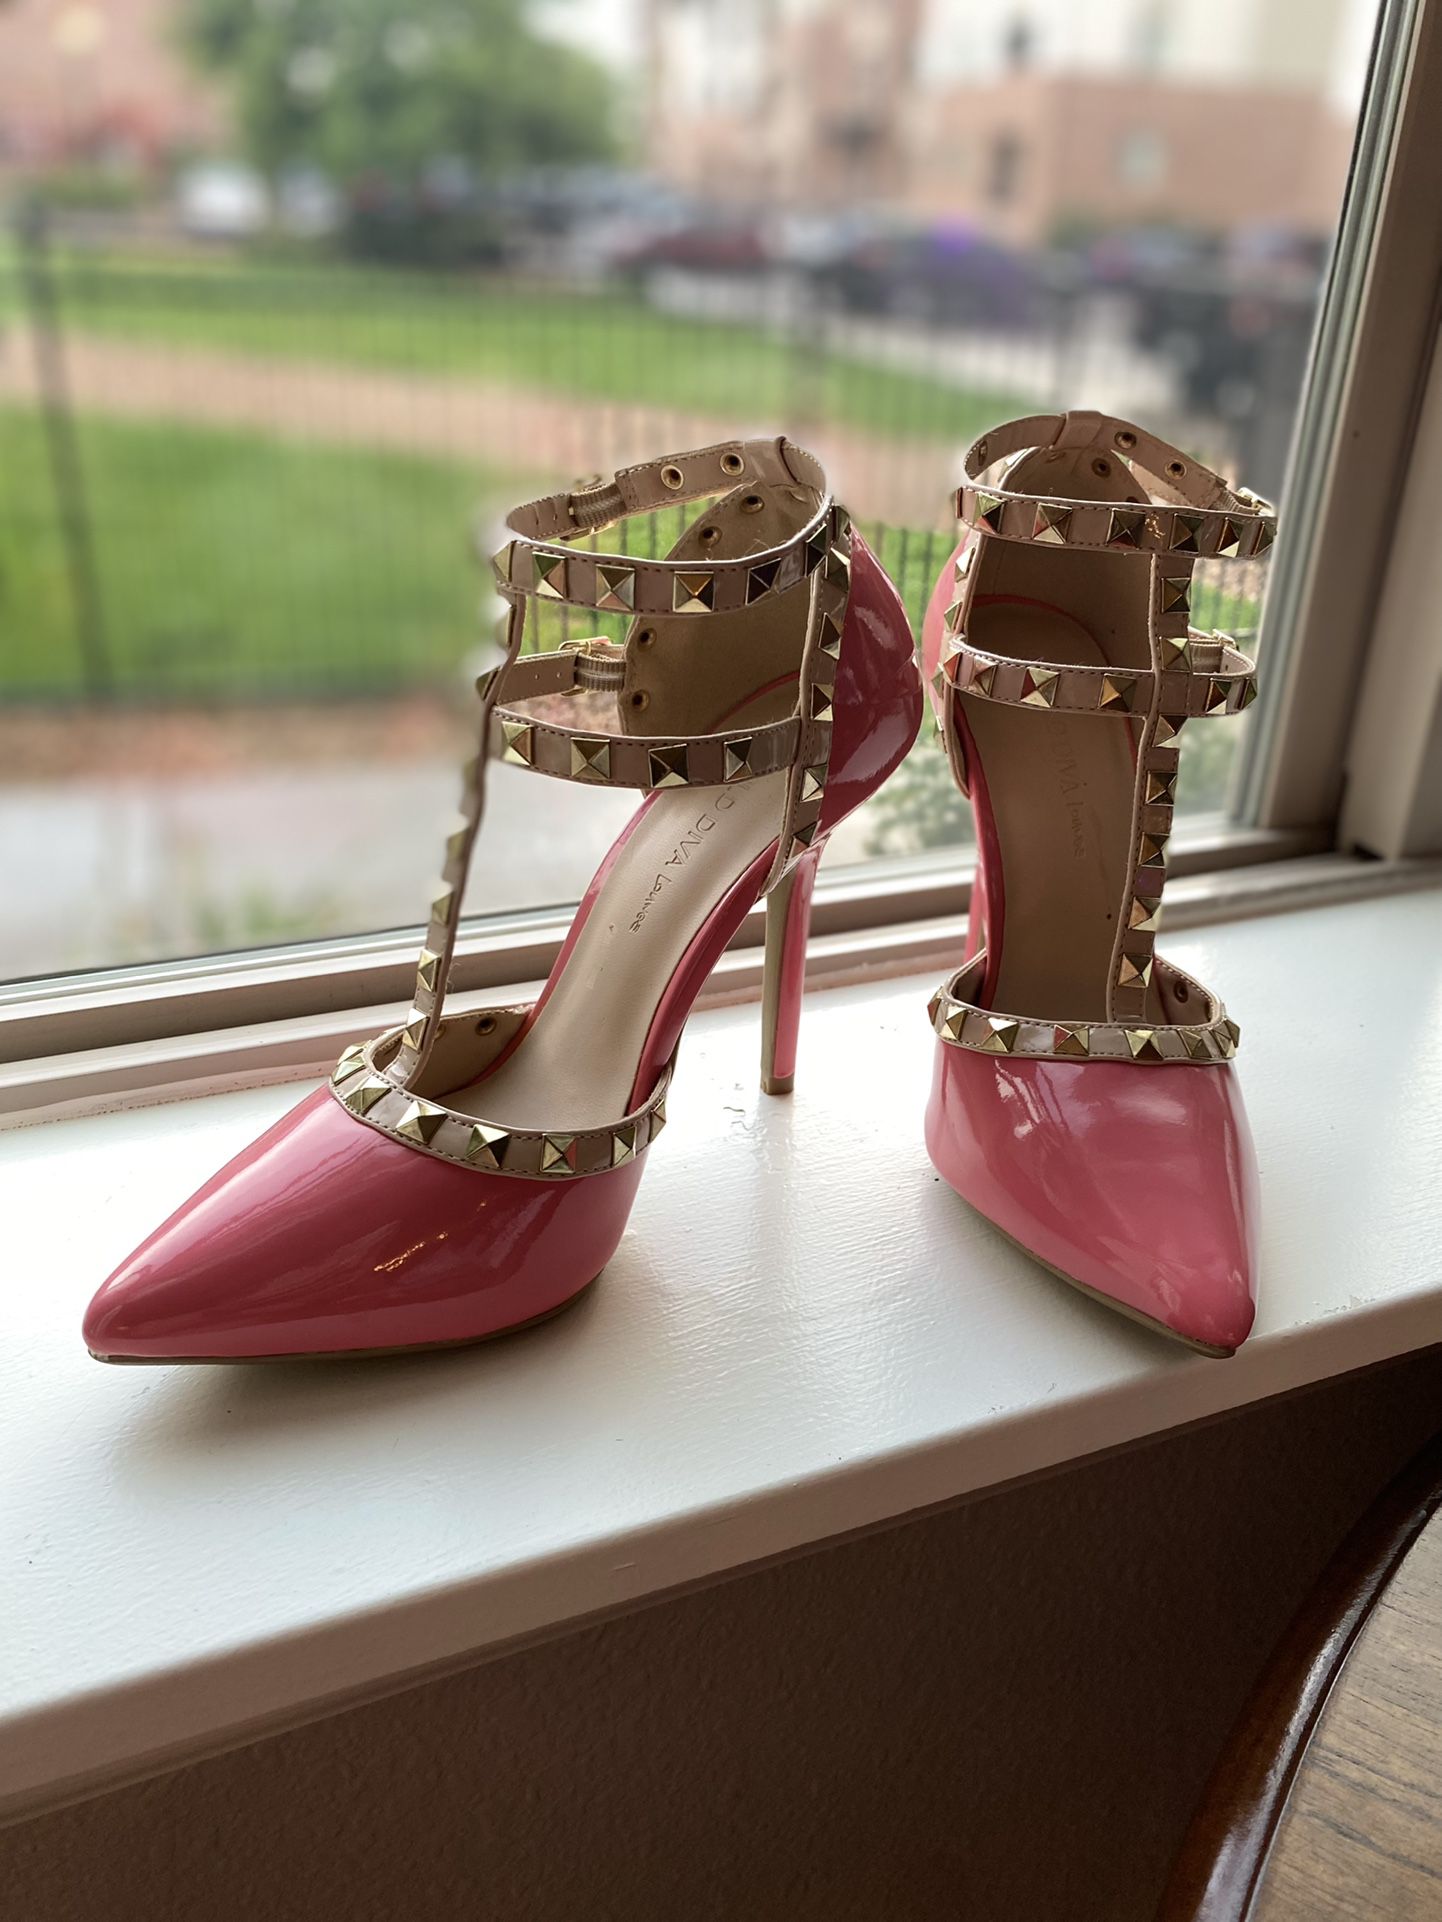 T-strap Studded Heels in Patent Pink